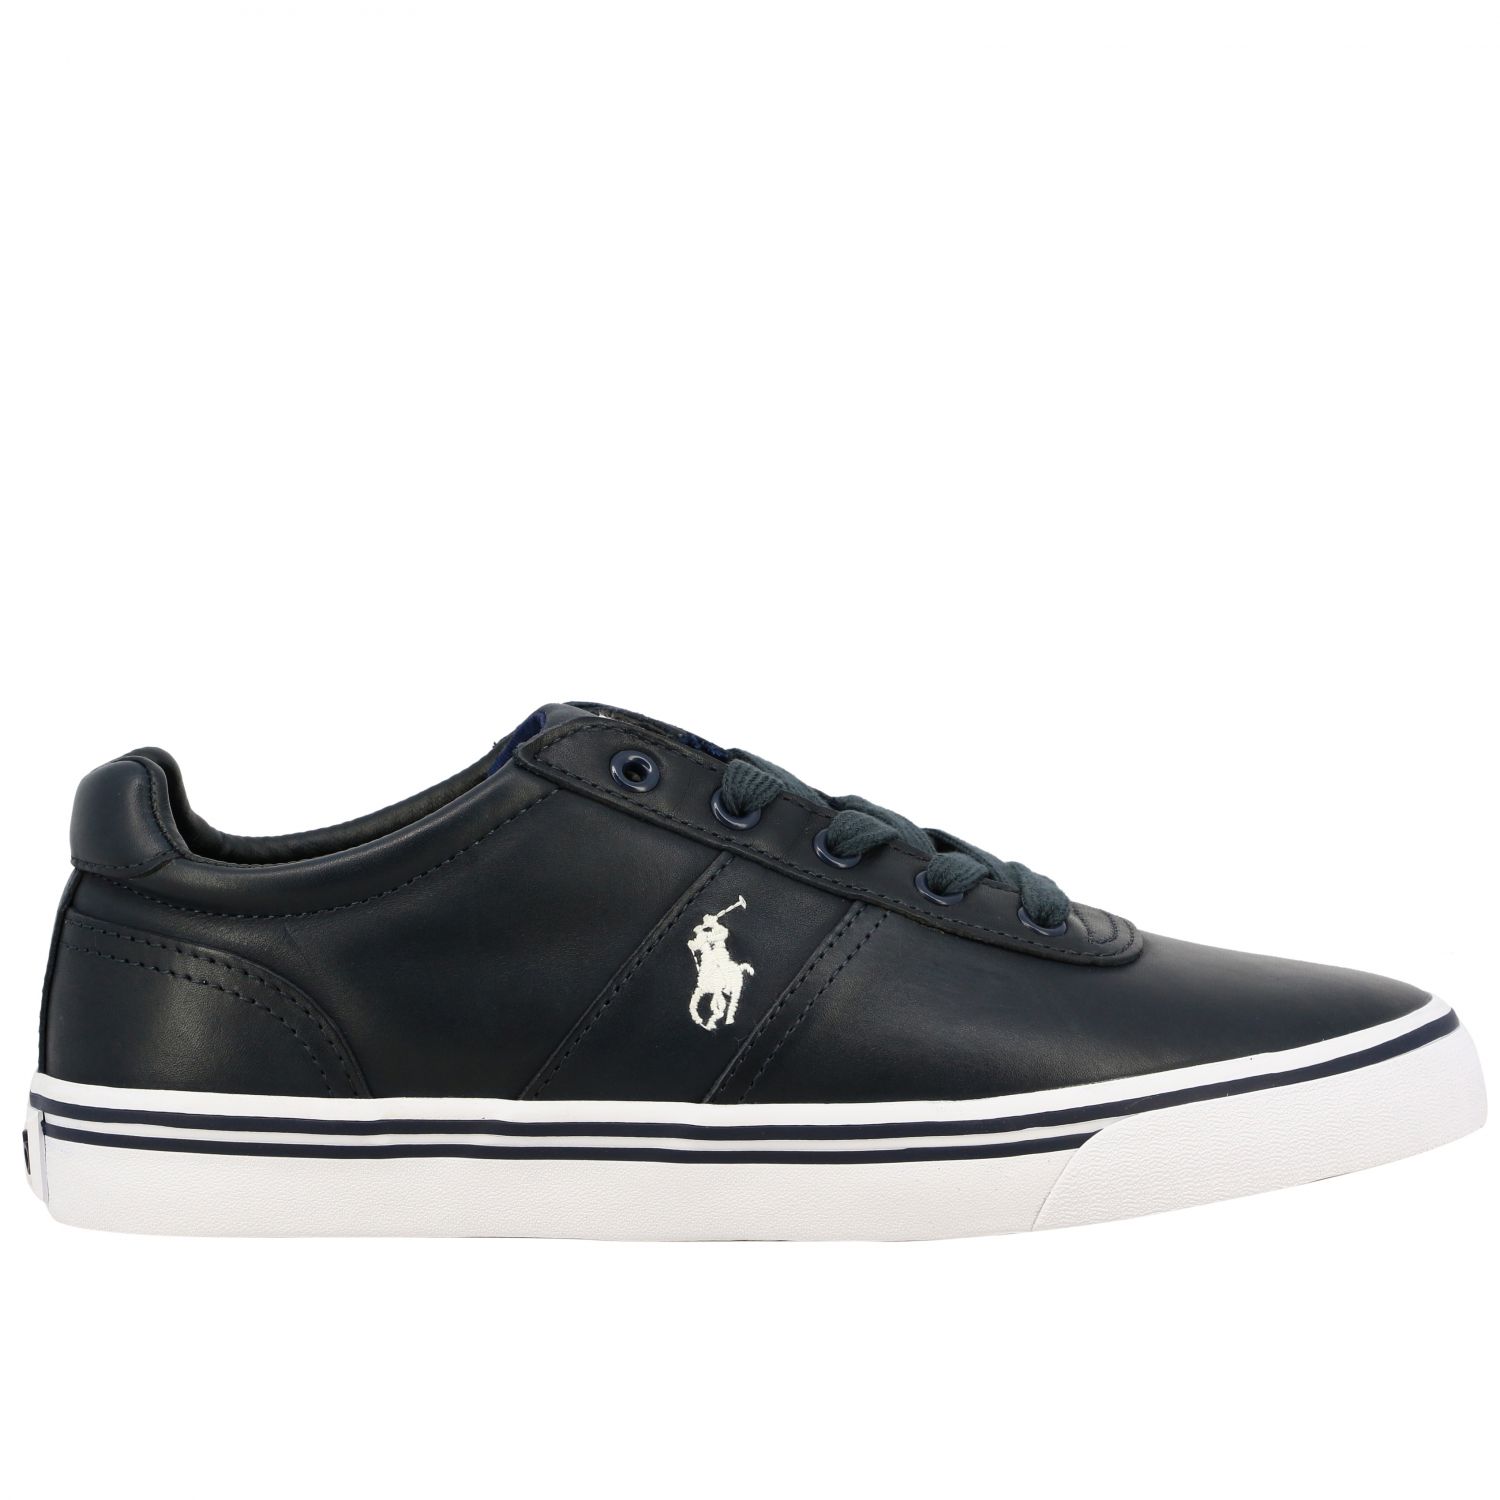 Polo Ralph Lauren Outlet: Hanford Lace-up sneakers with embroidered ...